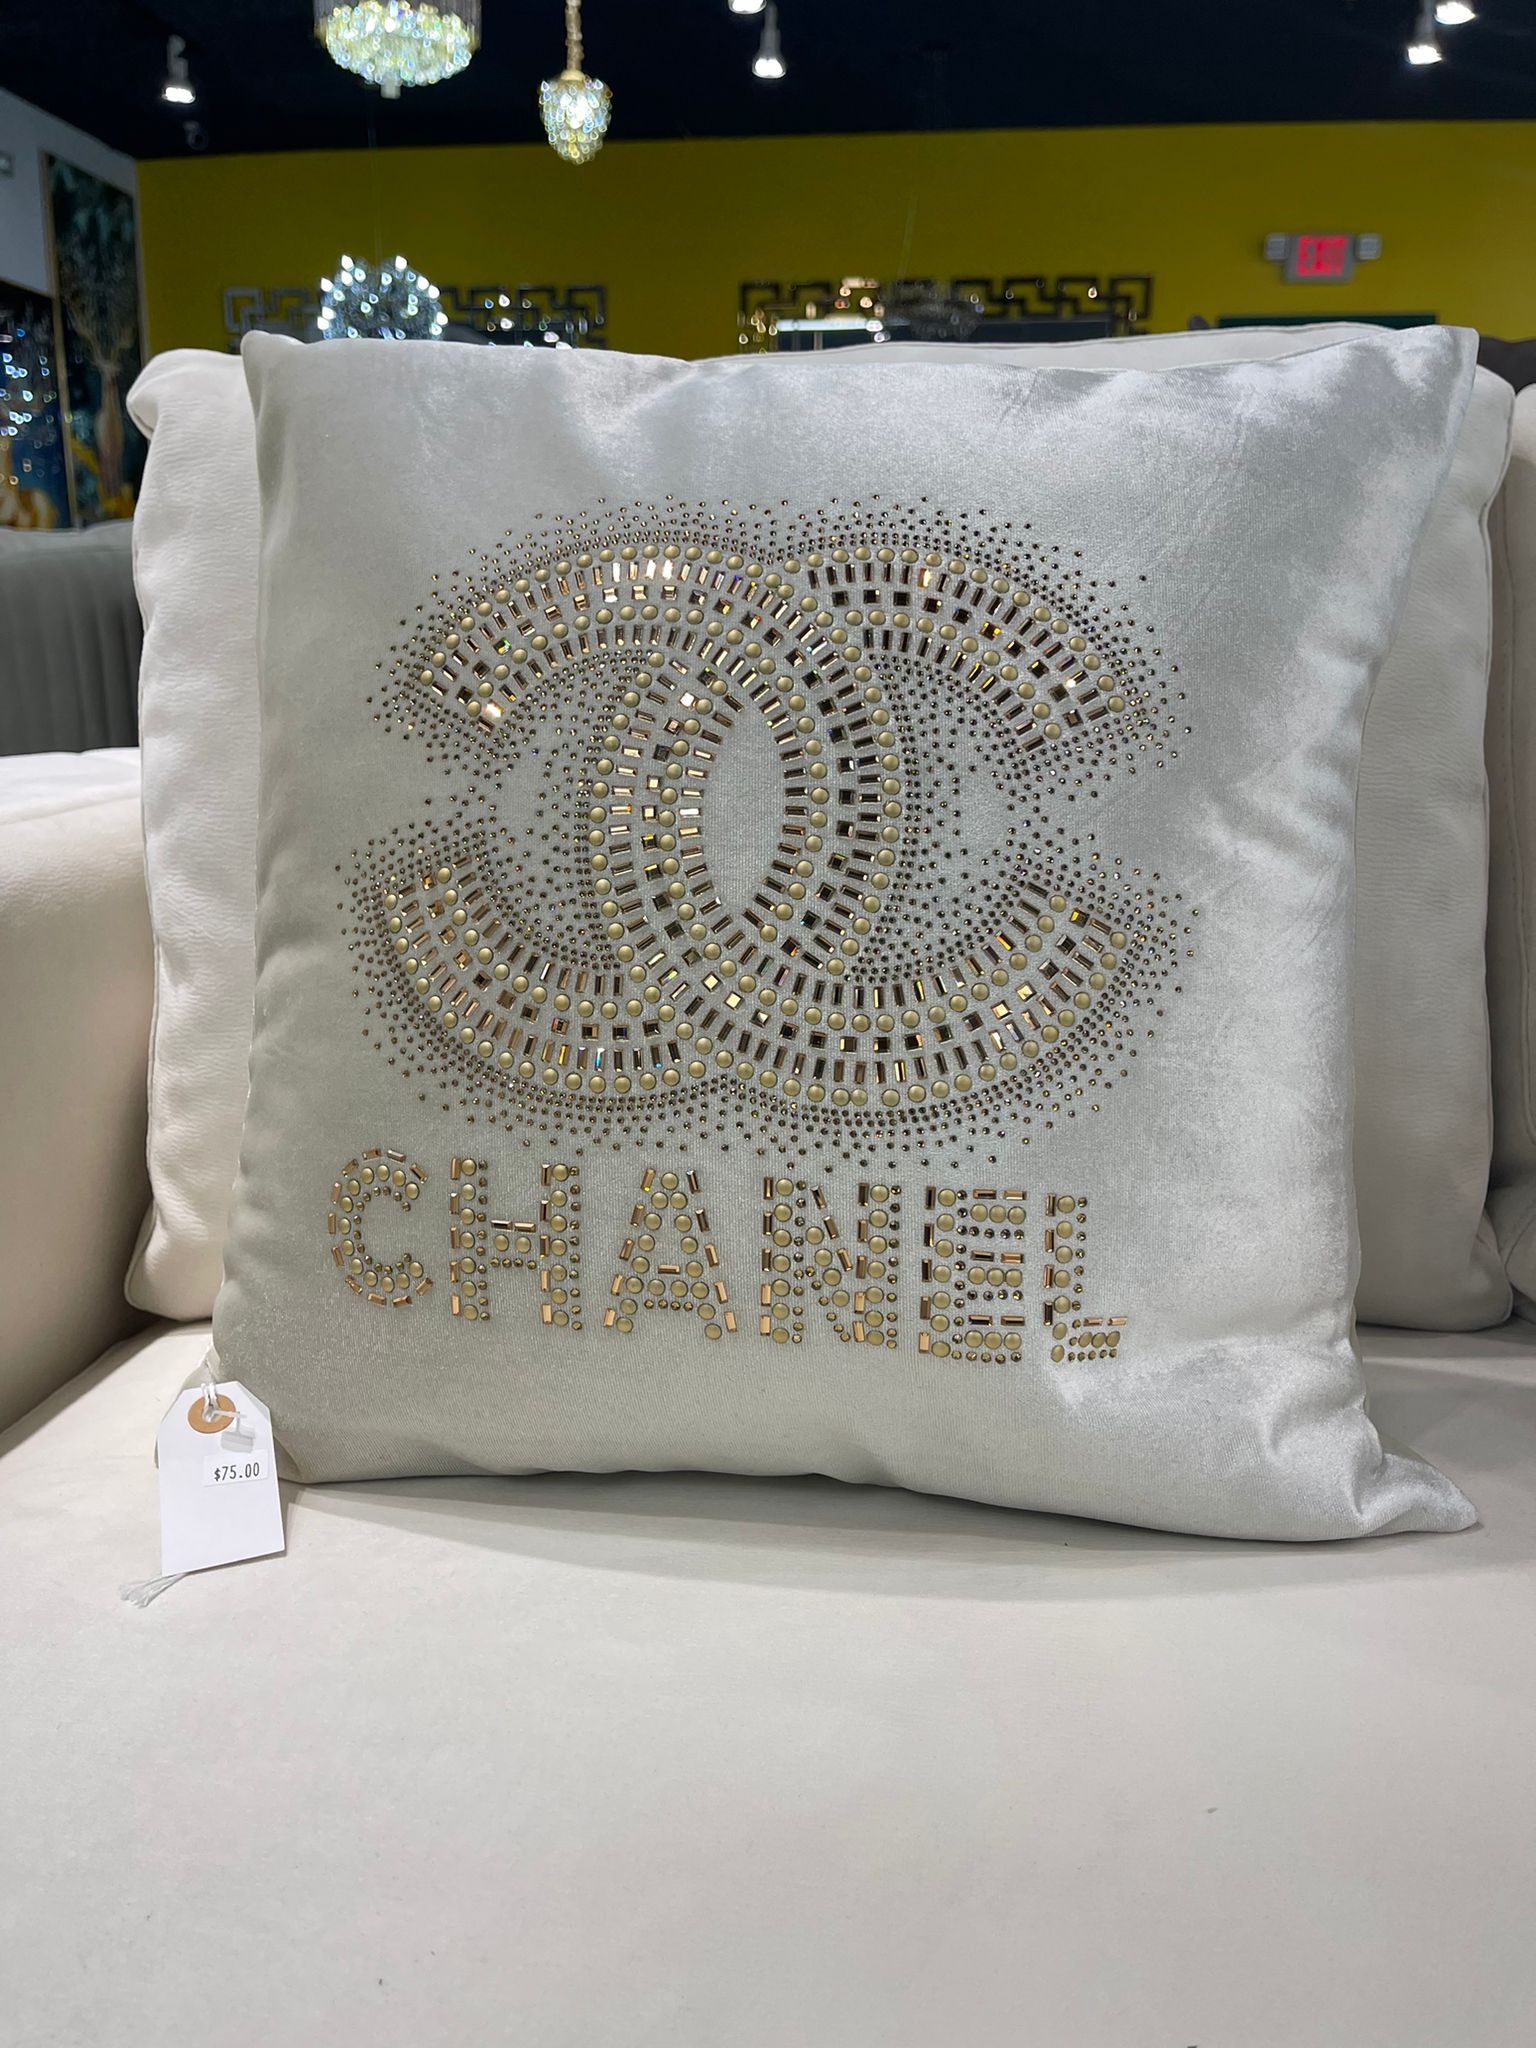 Karlexa Designs - Custom made CHANEL pillow case. Let me know your idea and  I will recreate it for you! #custommade #chanel #htvpillowcase  #madejustforyou #personalizedgifts #cricutmade #cricut #craftymom  #cricutmaker #housedecoration #chanelpillowcase